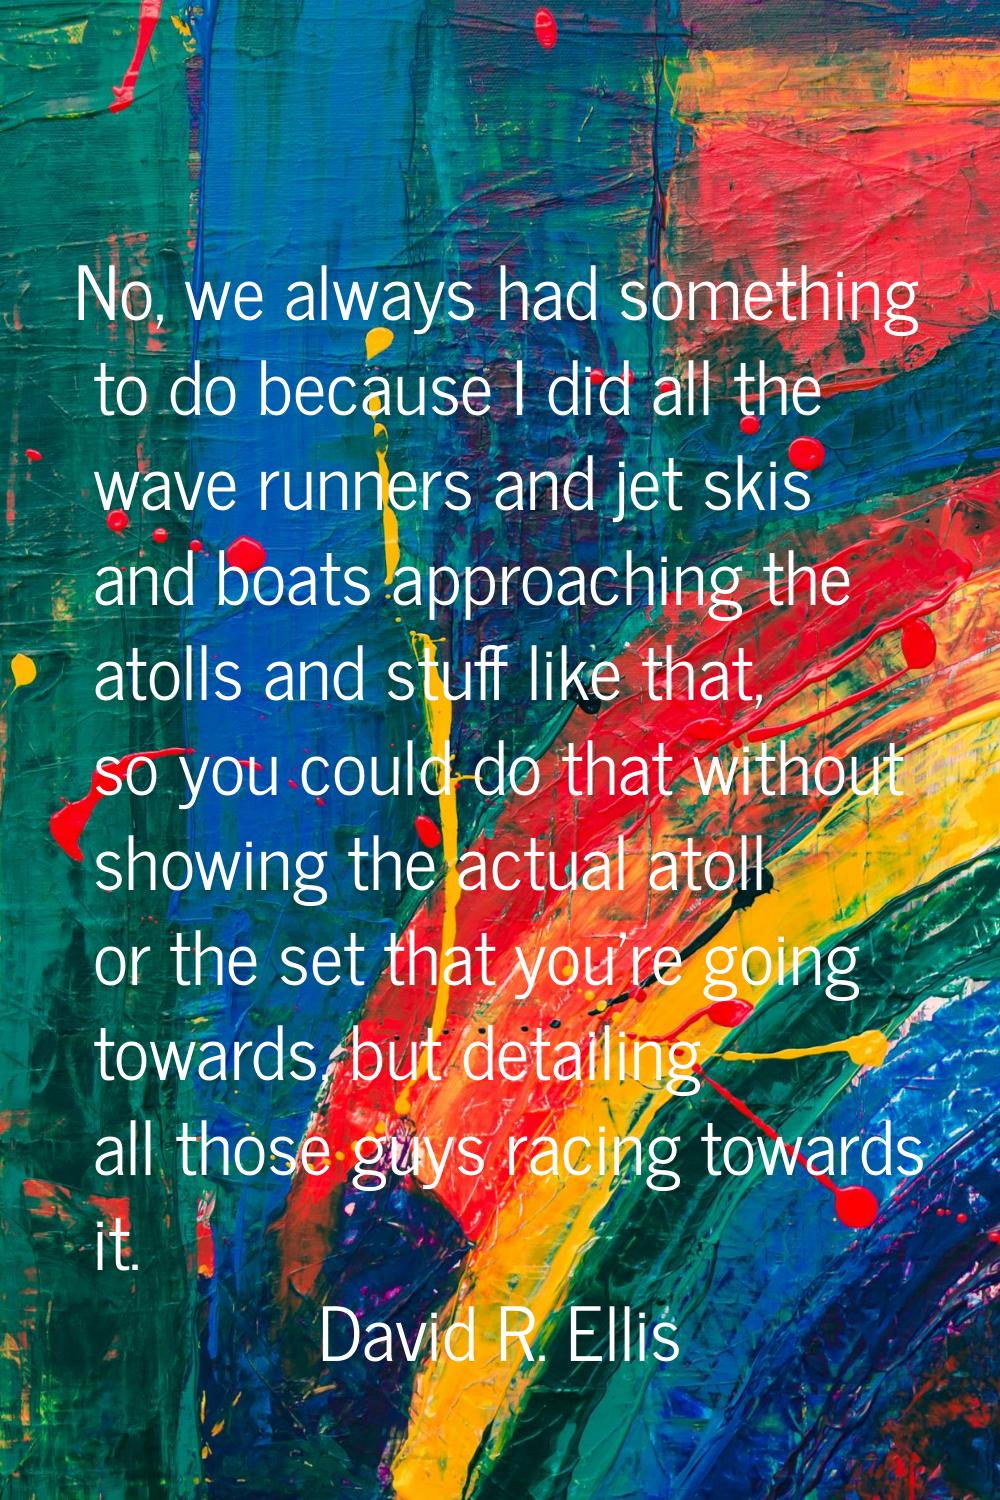 No, we always had something to do because I did all the wave runners and jet skis and boats approac